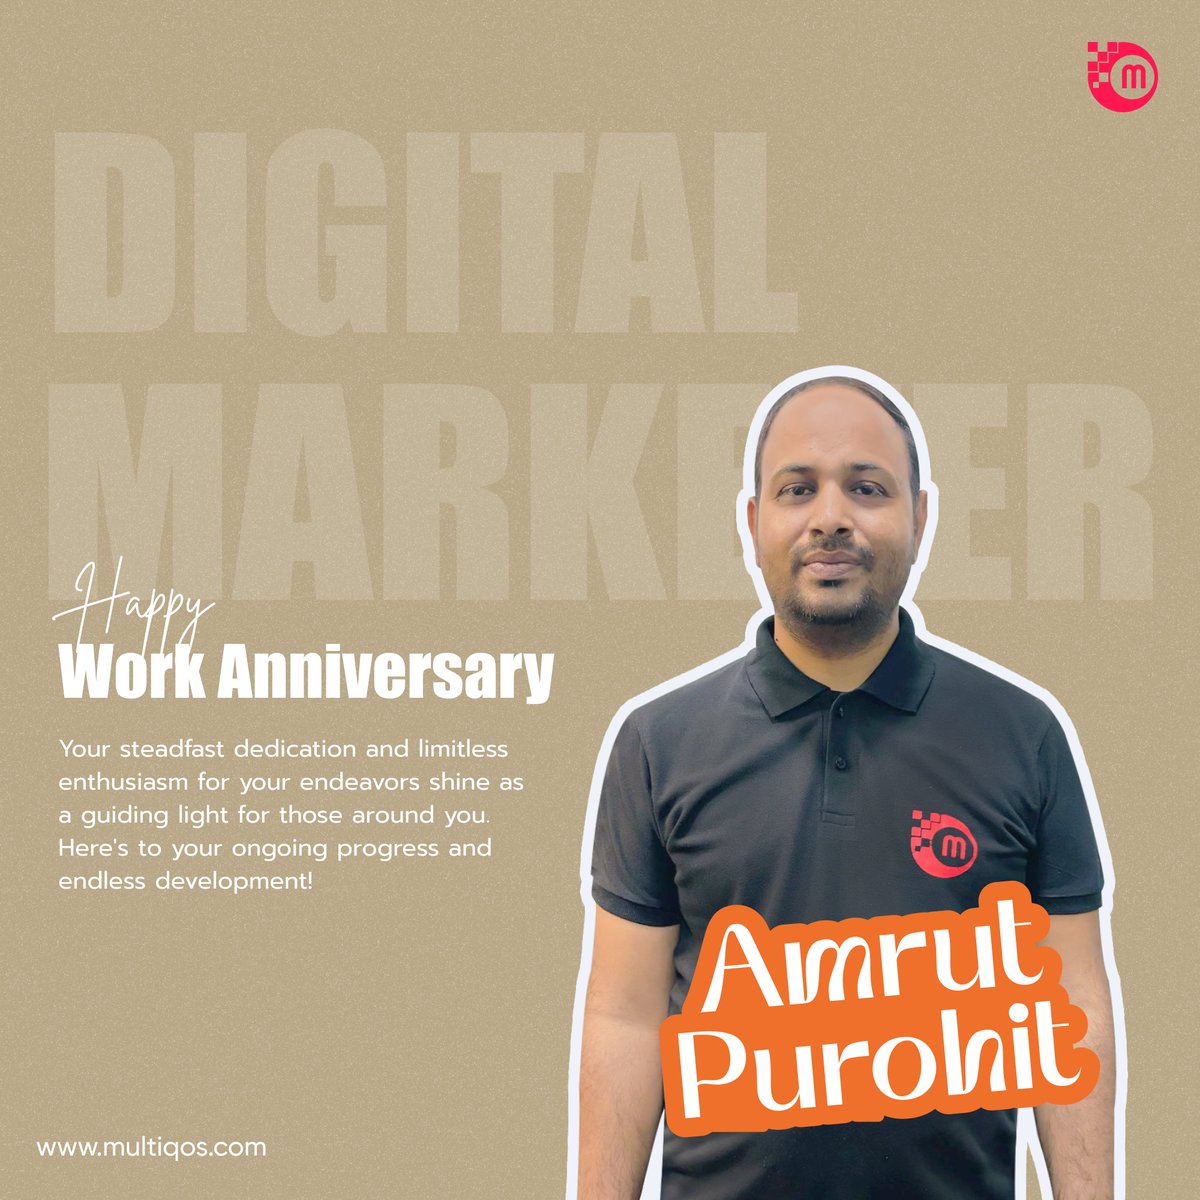 Congratulations on your #workanniversary, 𝐀𝐦𝐫𝐮𝐭 𝐏𝐮𝐫𝐨𝐡𝐢𝐭!

Your hard work and dedication have not gone unnoticed, and we are grateful for all that you have contributed.

#milestonemoments #digitalmarketer #employeeappreciation #multiqosculture #lifeatmultiqos